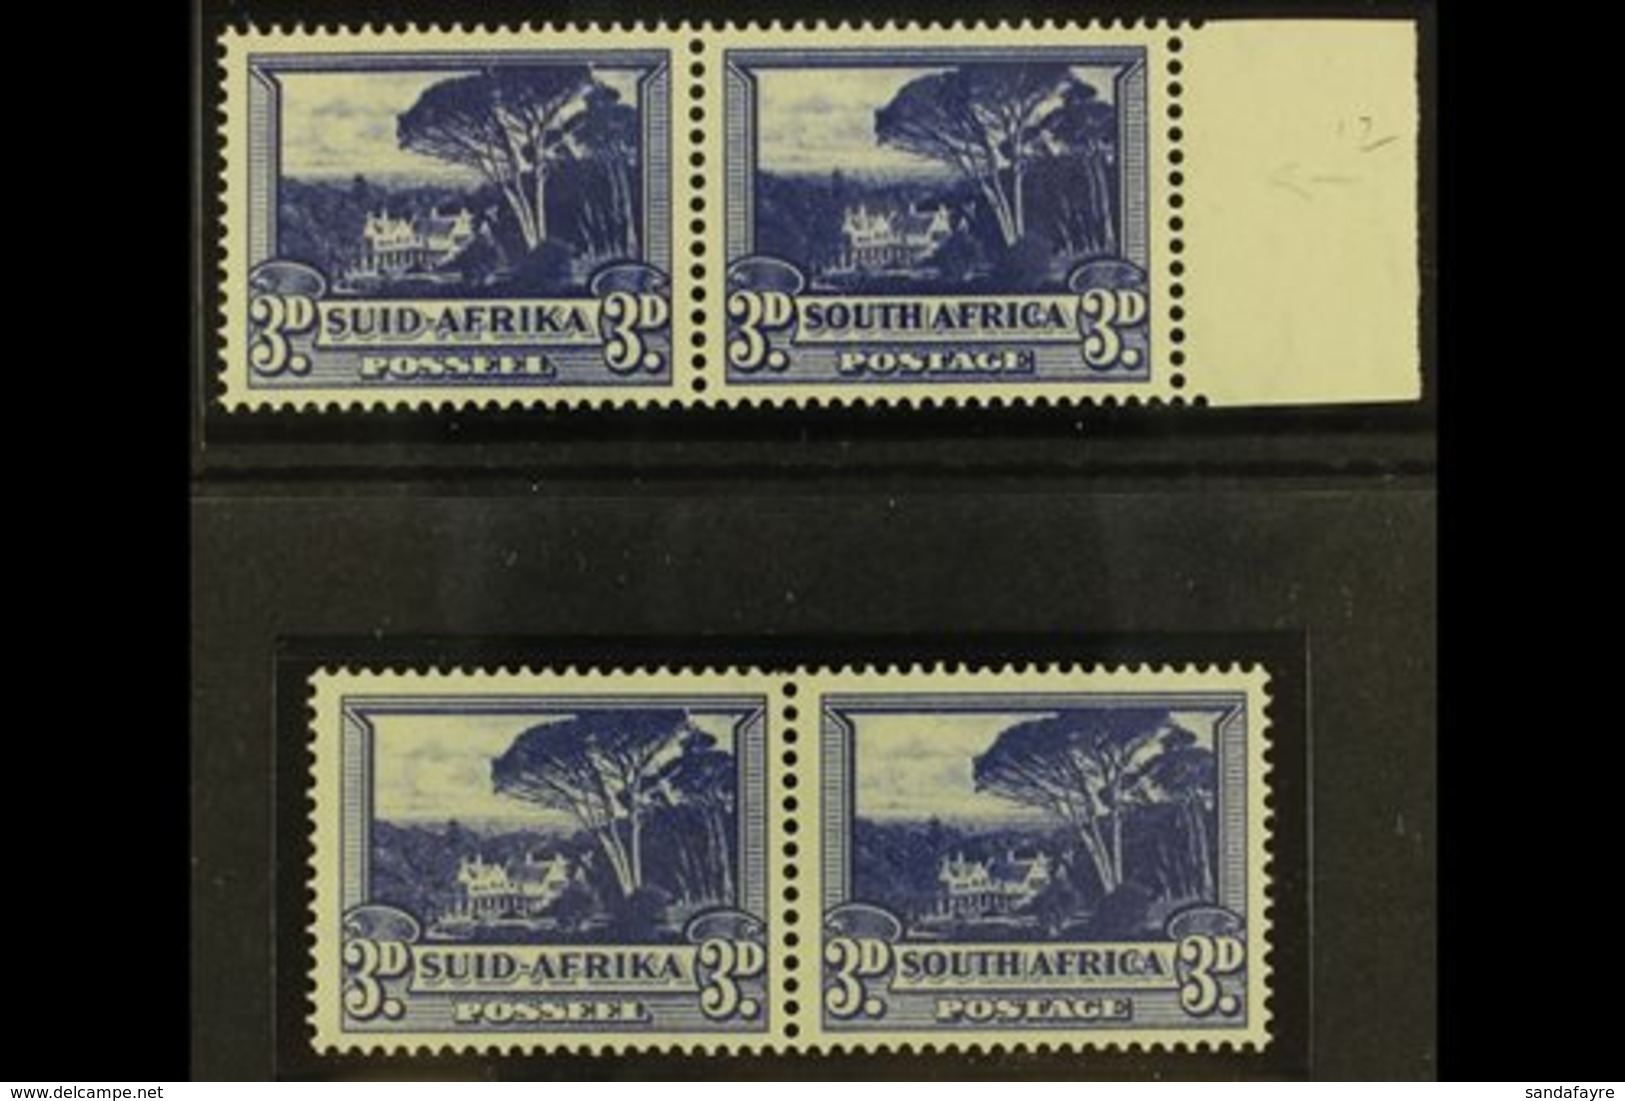 1947-54  3d Deep Intense Blue, SACC 116b (formerly SG 117b) Accompanied By 1954 Dark Blue Reprint For Comparison, Both N - Unclassified